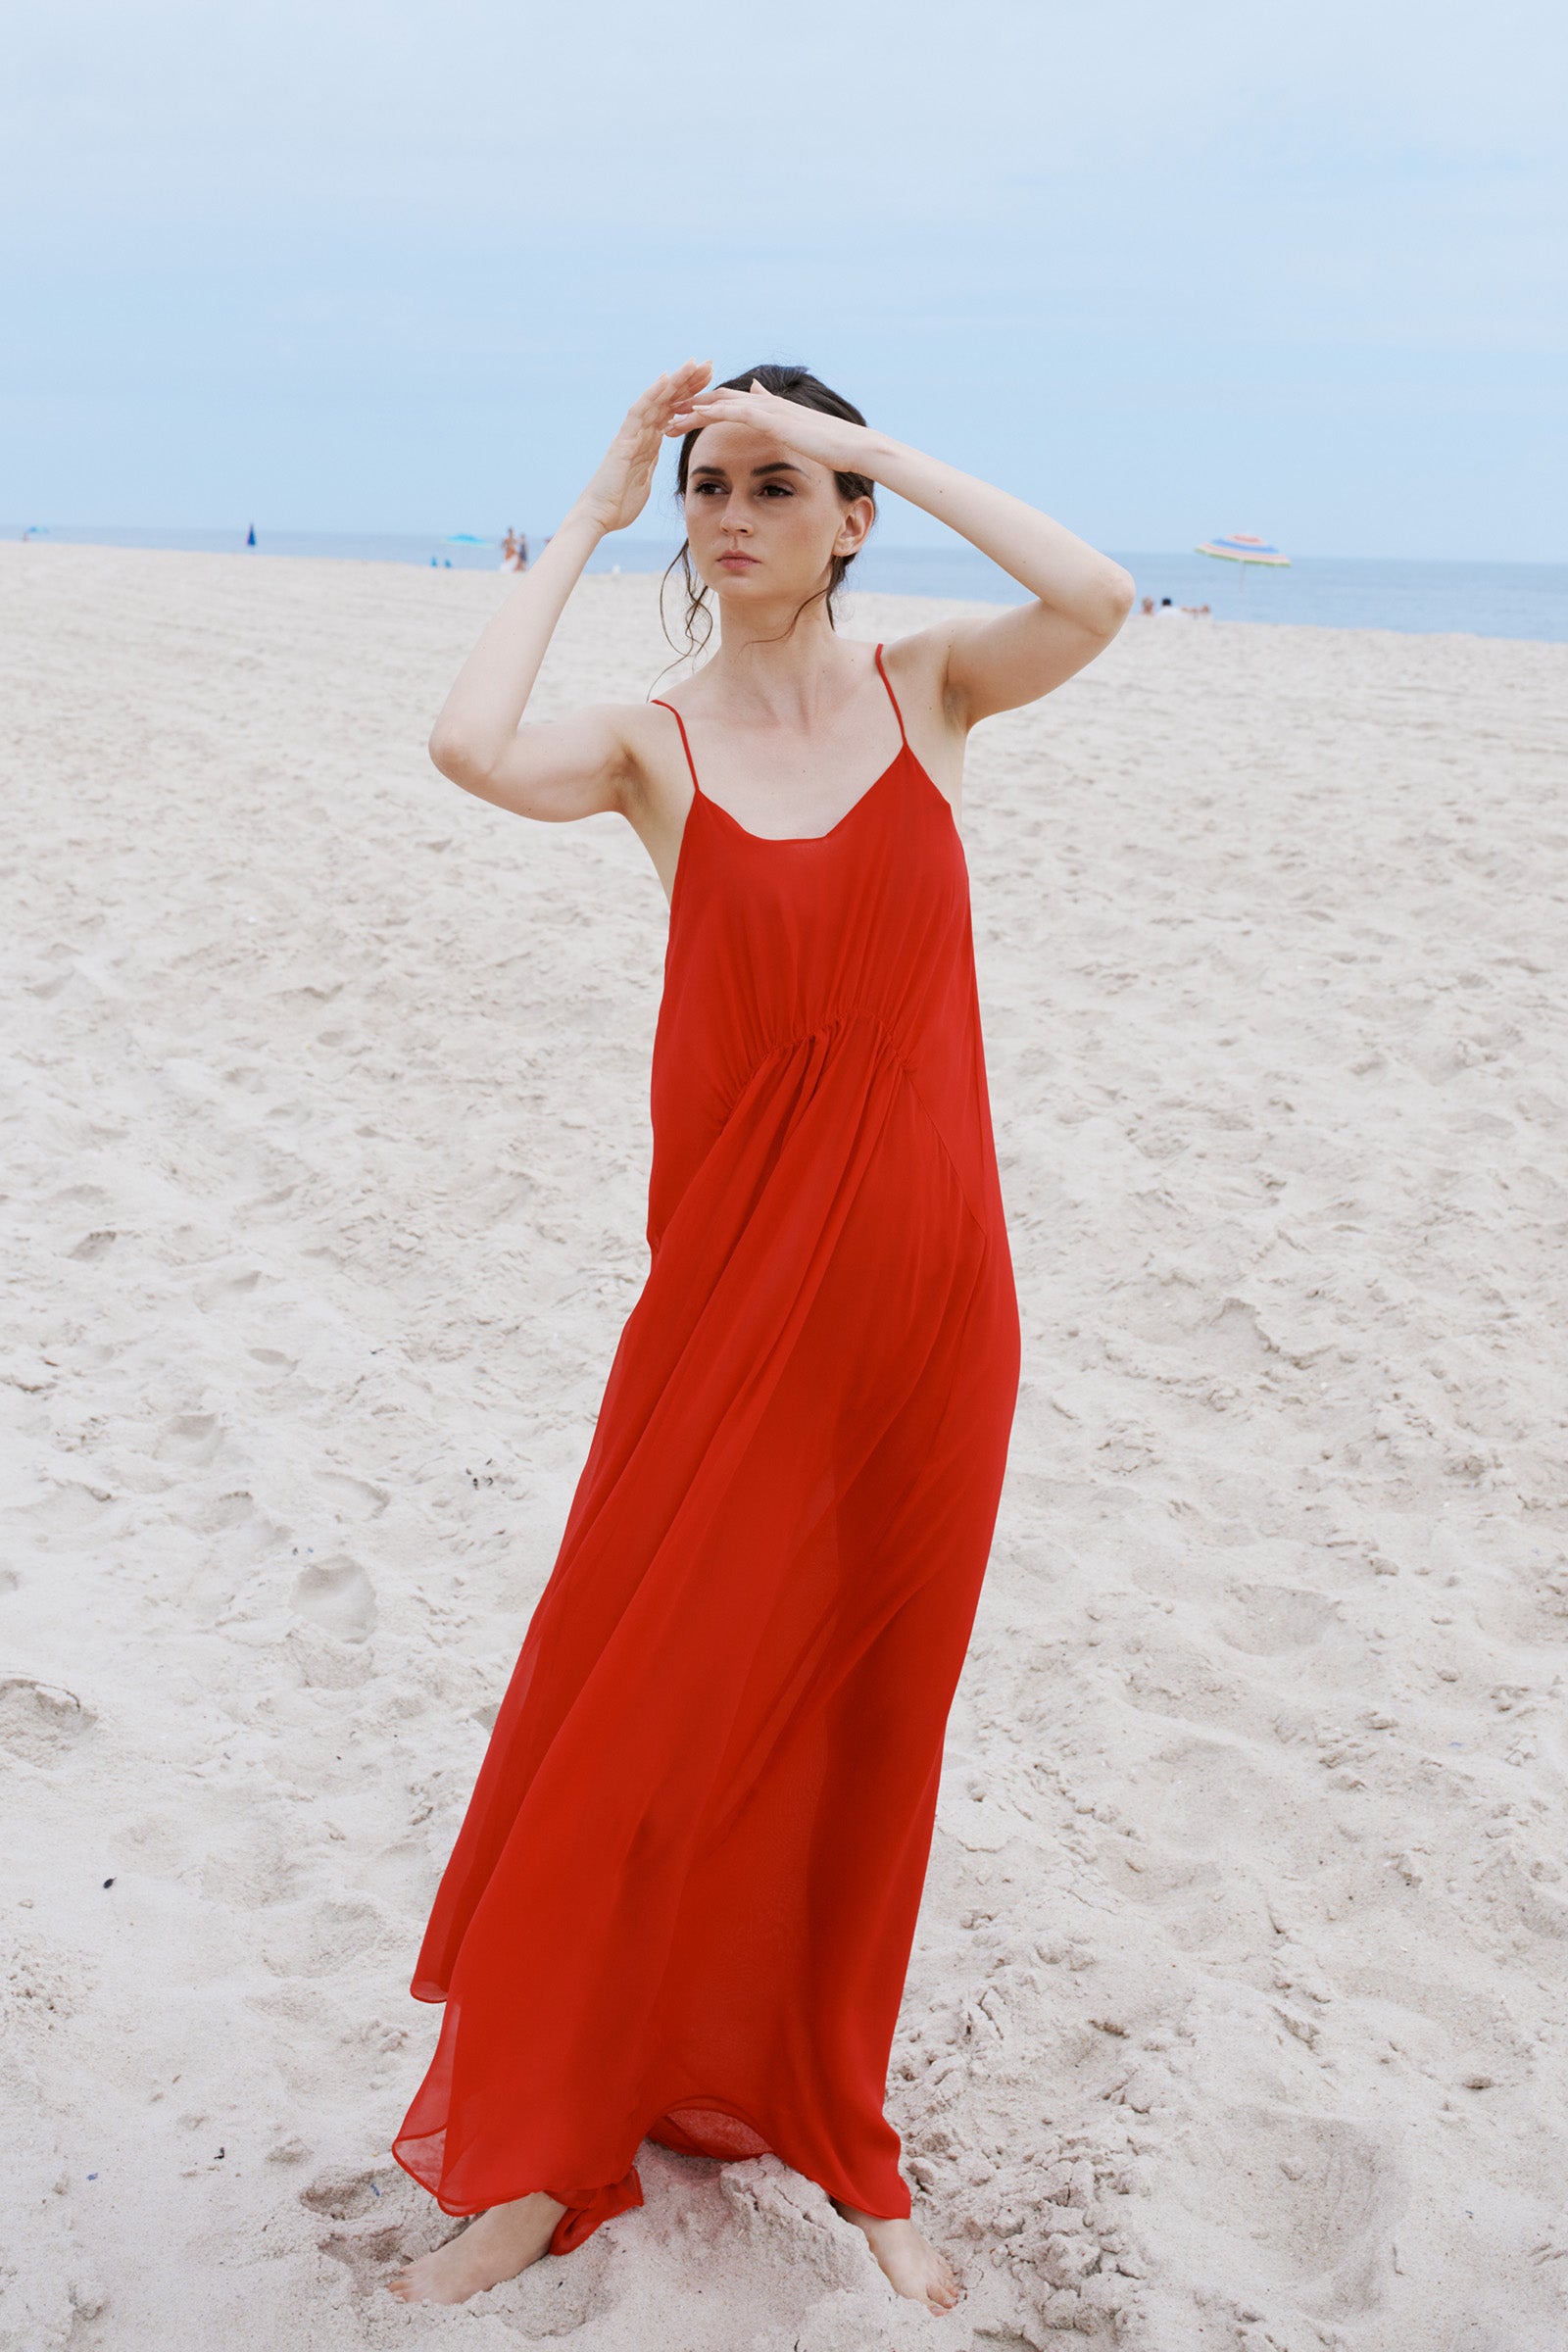 Kal Rieman Cora Shirred Maxi Dress in Red on model lookbook image front view